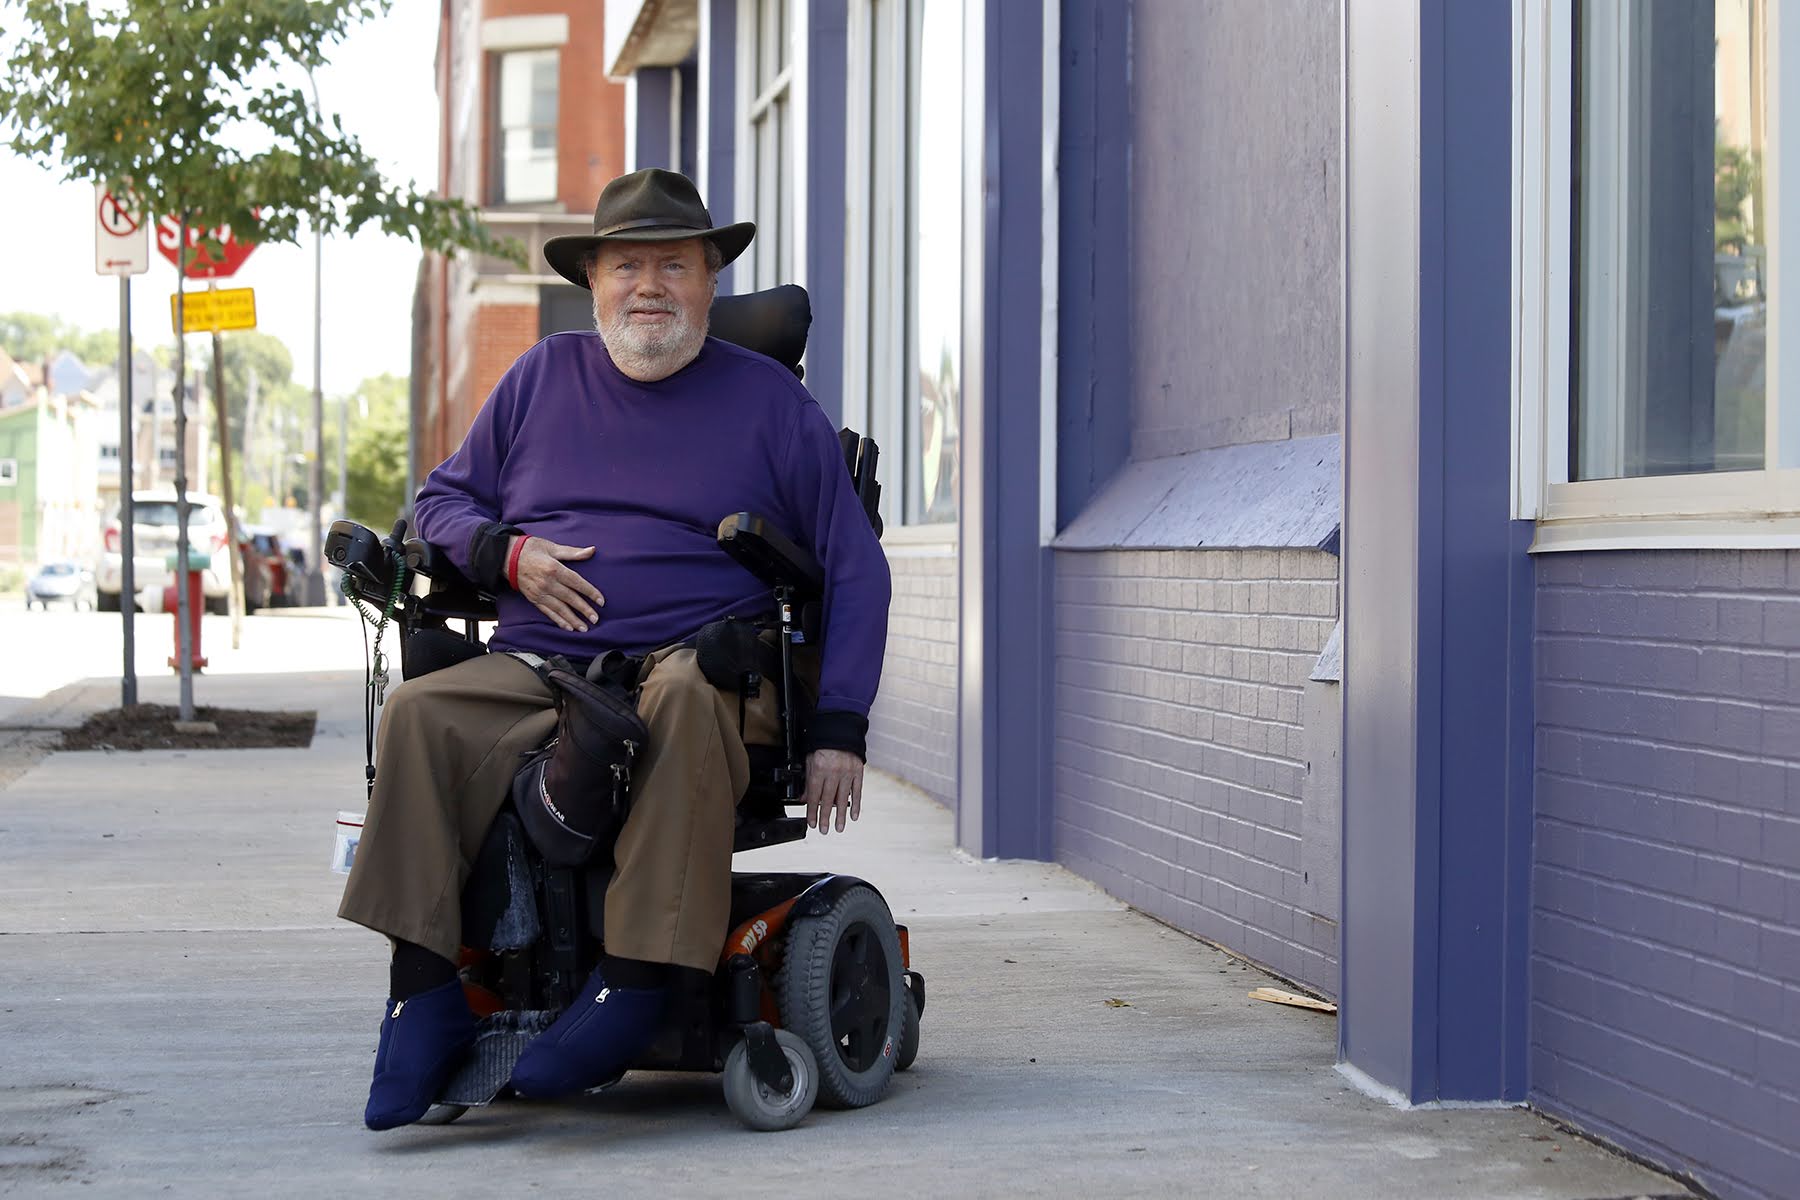 Photograph of essay author John Tague, a white man in sitting in a power wheelchair. He's on the sidewalk facing the camera, wearing a purple sweater and wide hat.